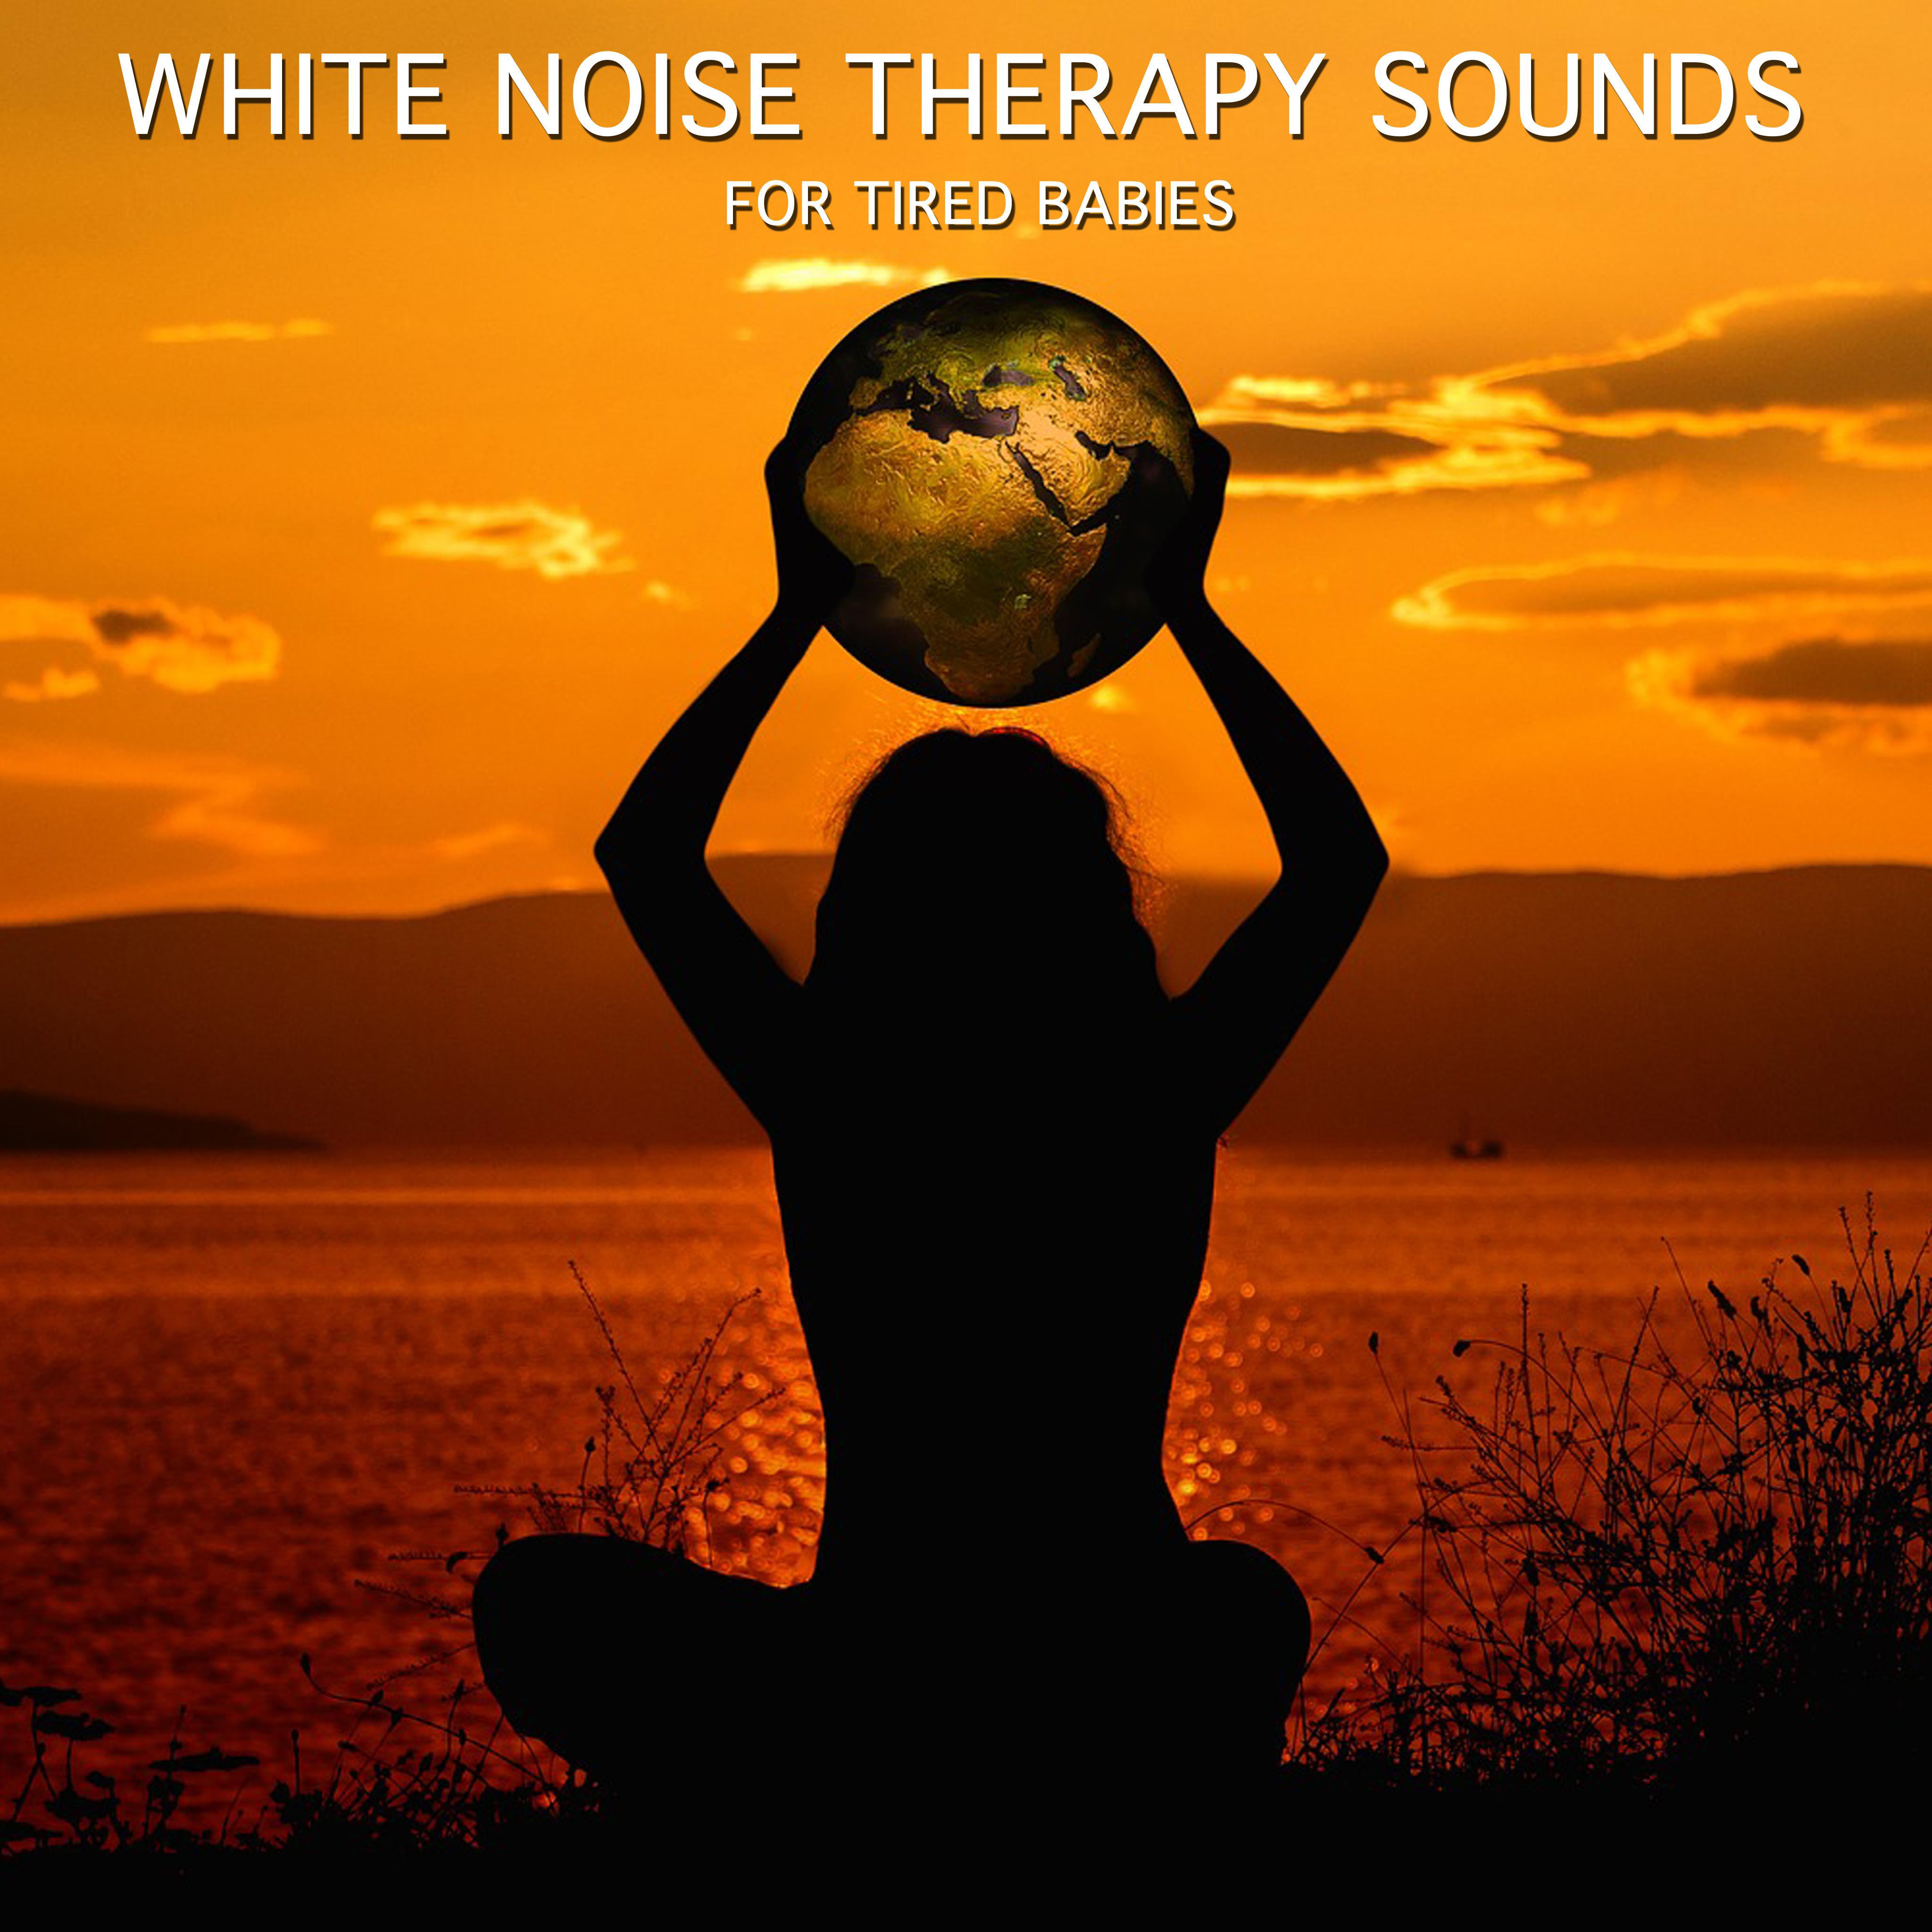 11 White Noise Therapy Sounds for Tired Babies